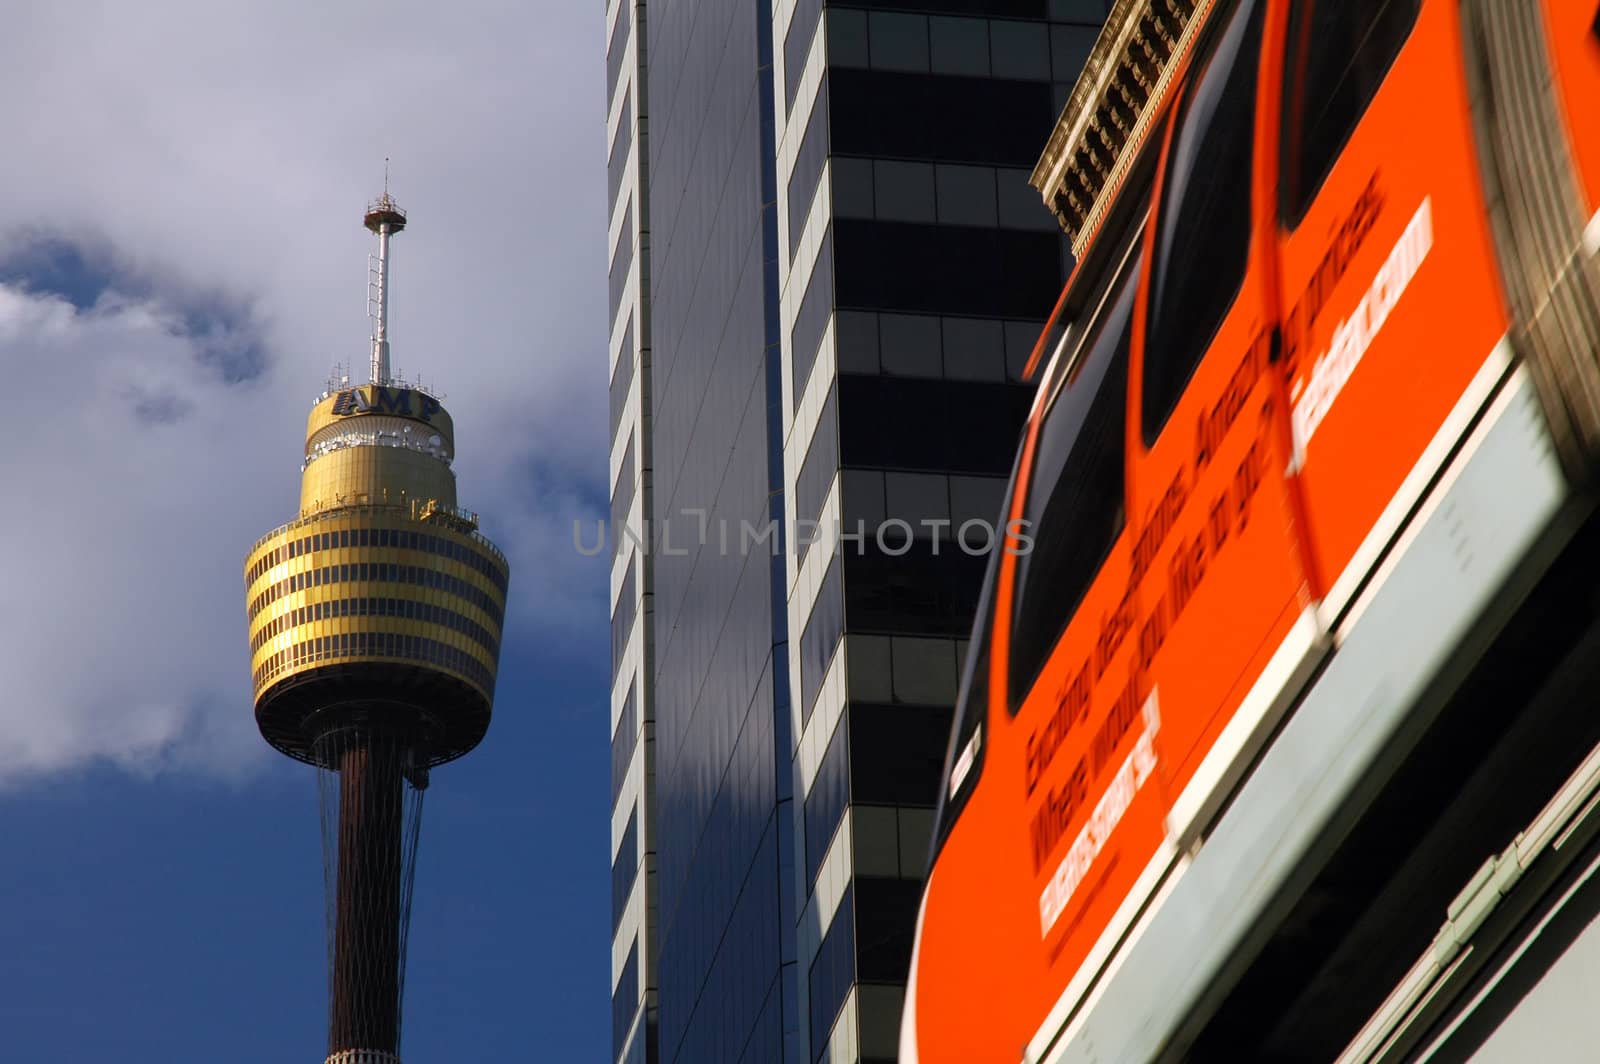 sydney tower and red monorail, detail photography